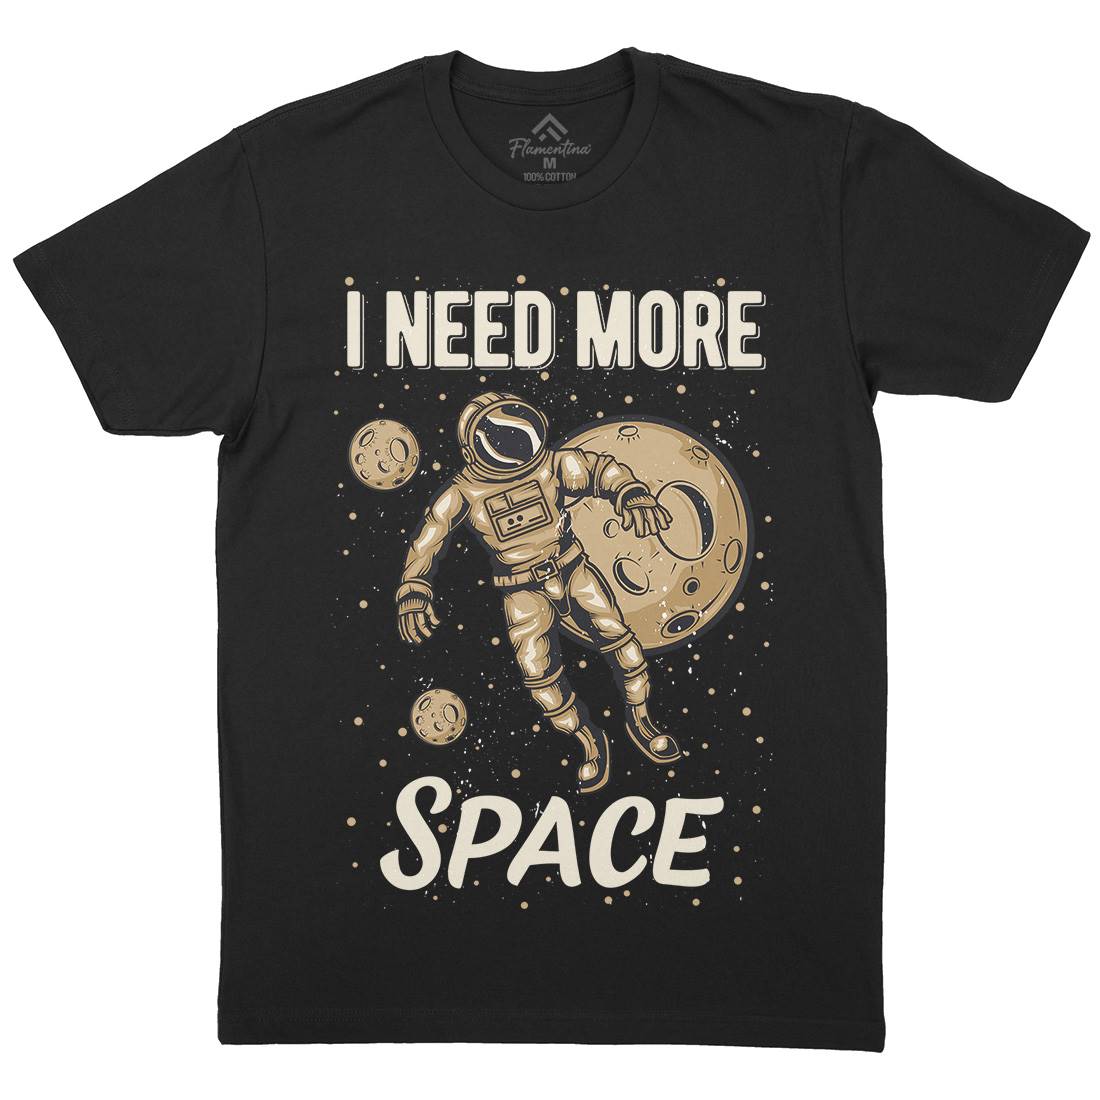 Need More Mens Crew Neck T-Shirt Space B168